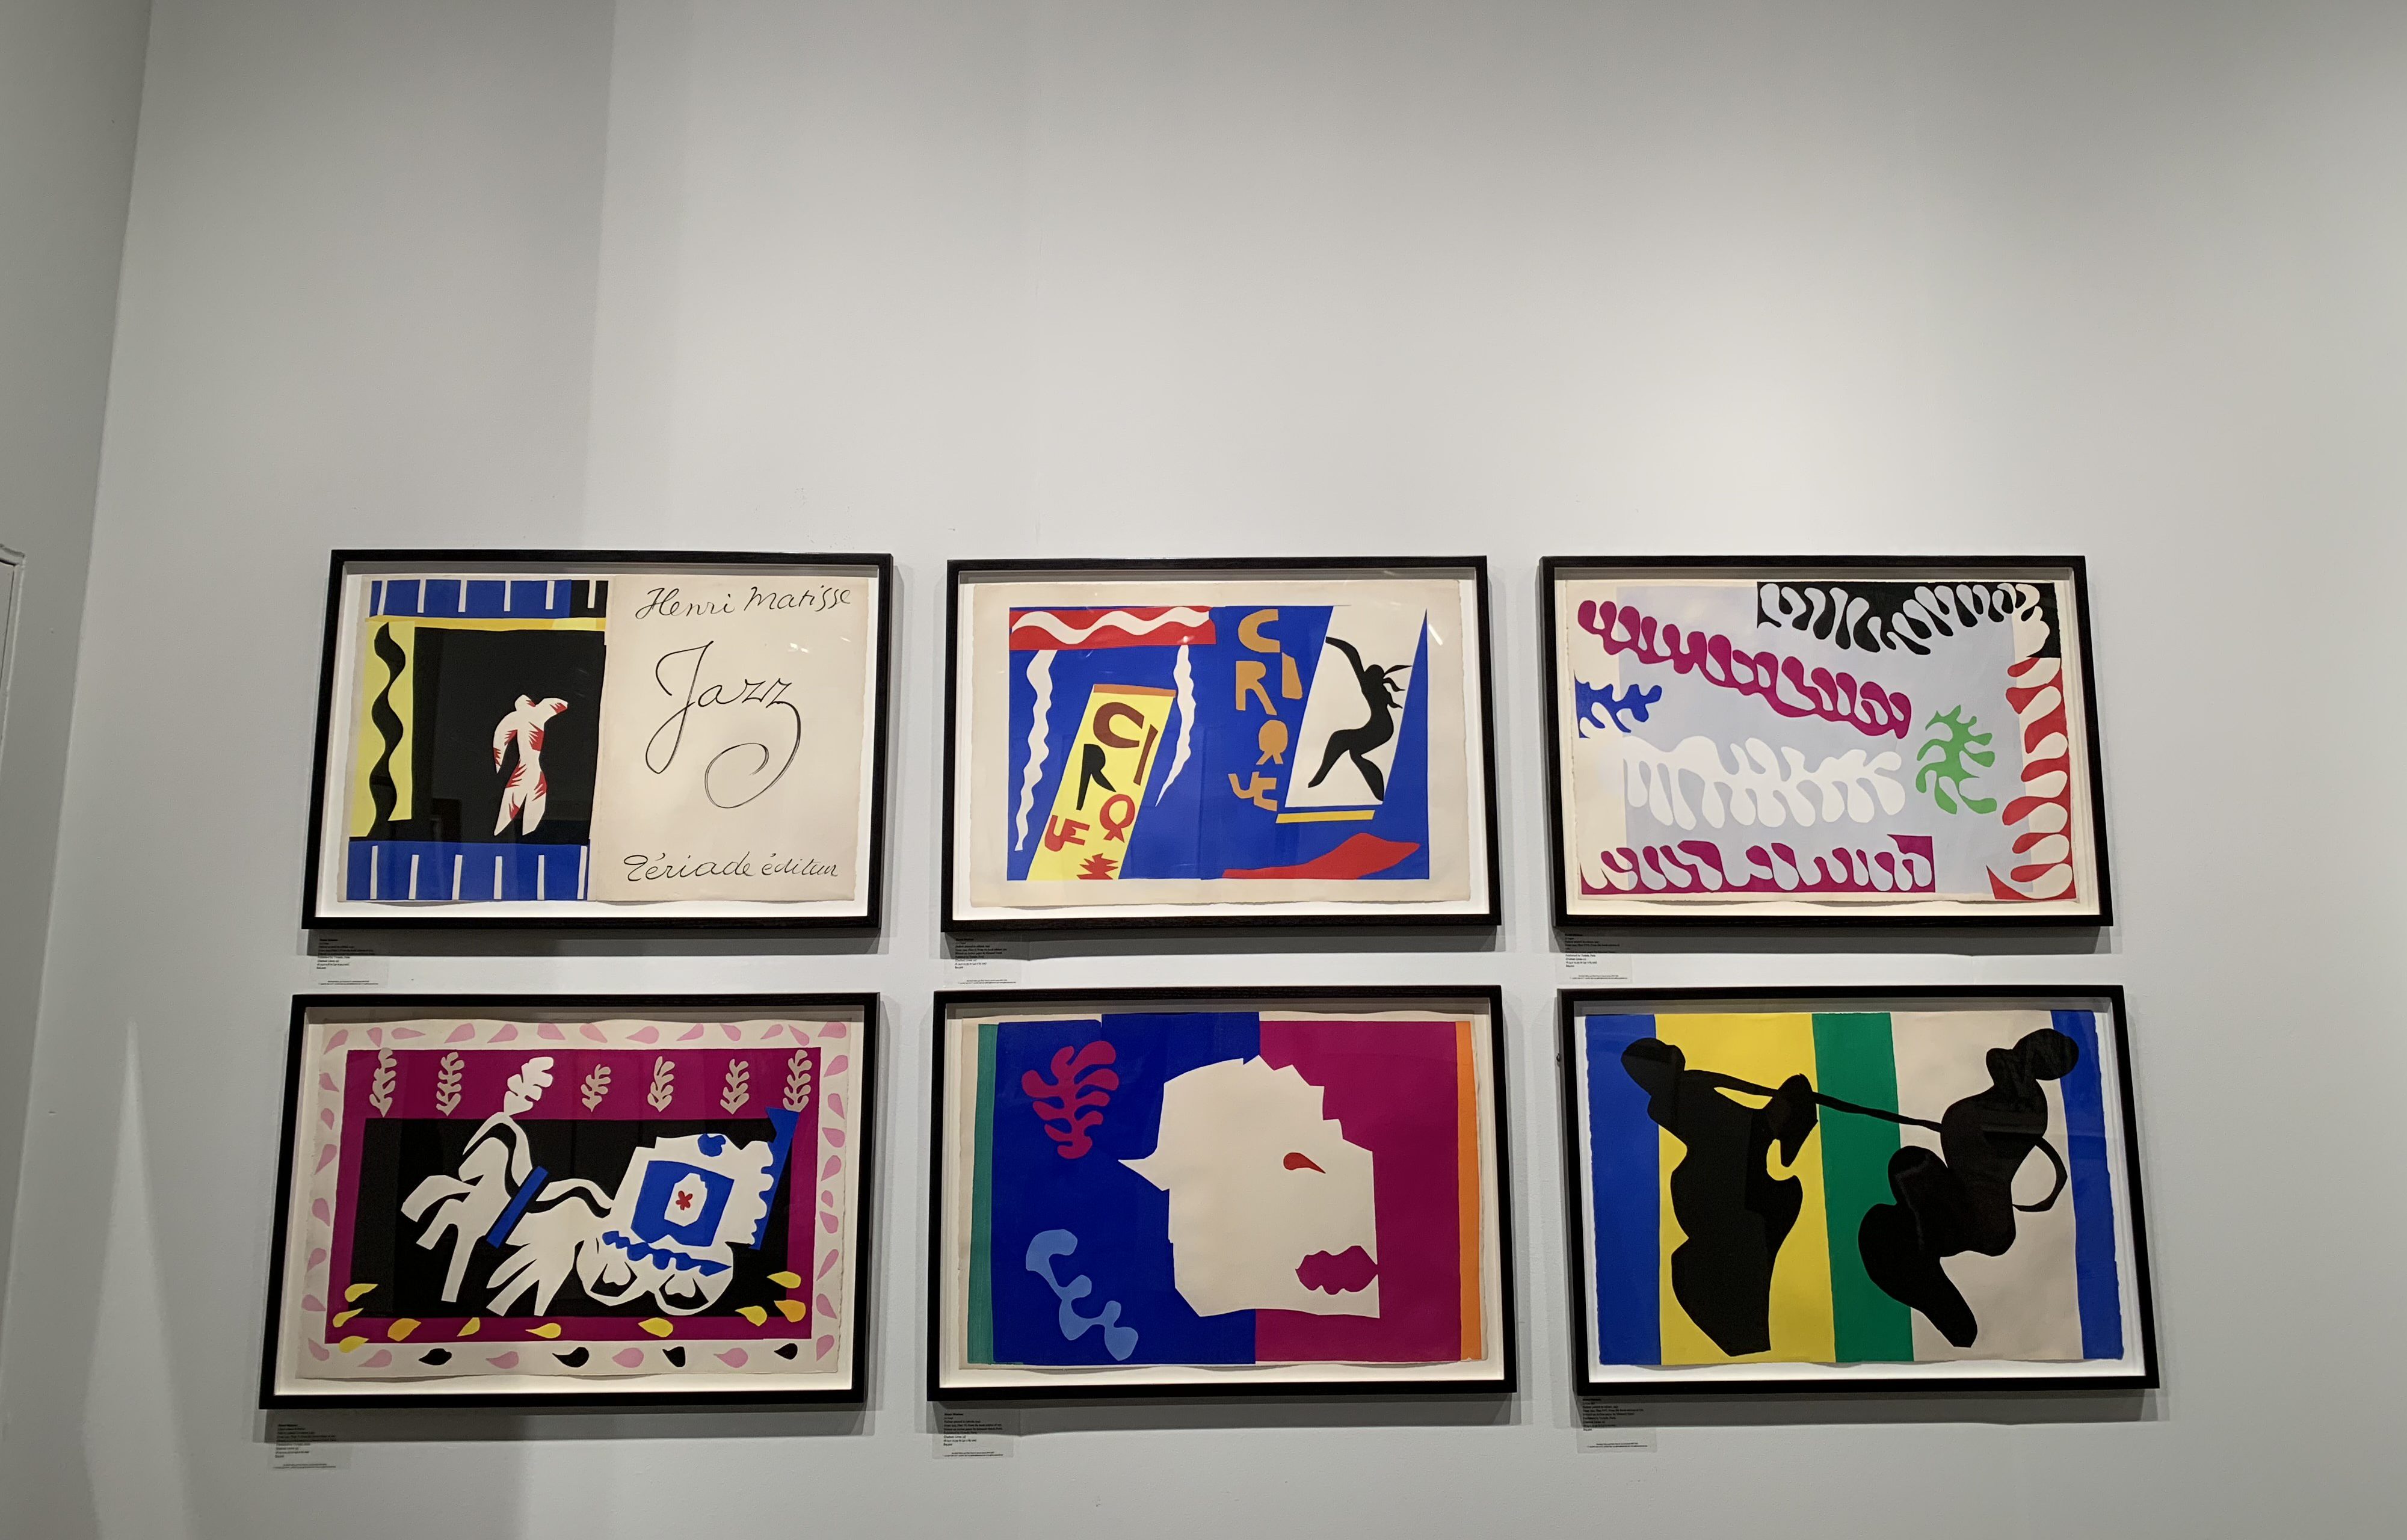 Henri Matisse’s cut-out series at the Sims Reed Gallery booth.